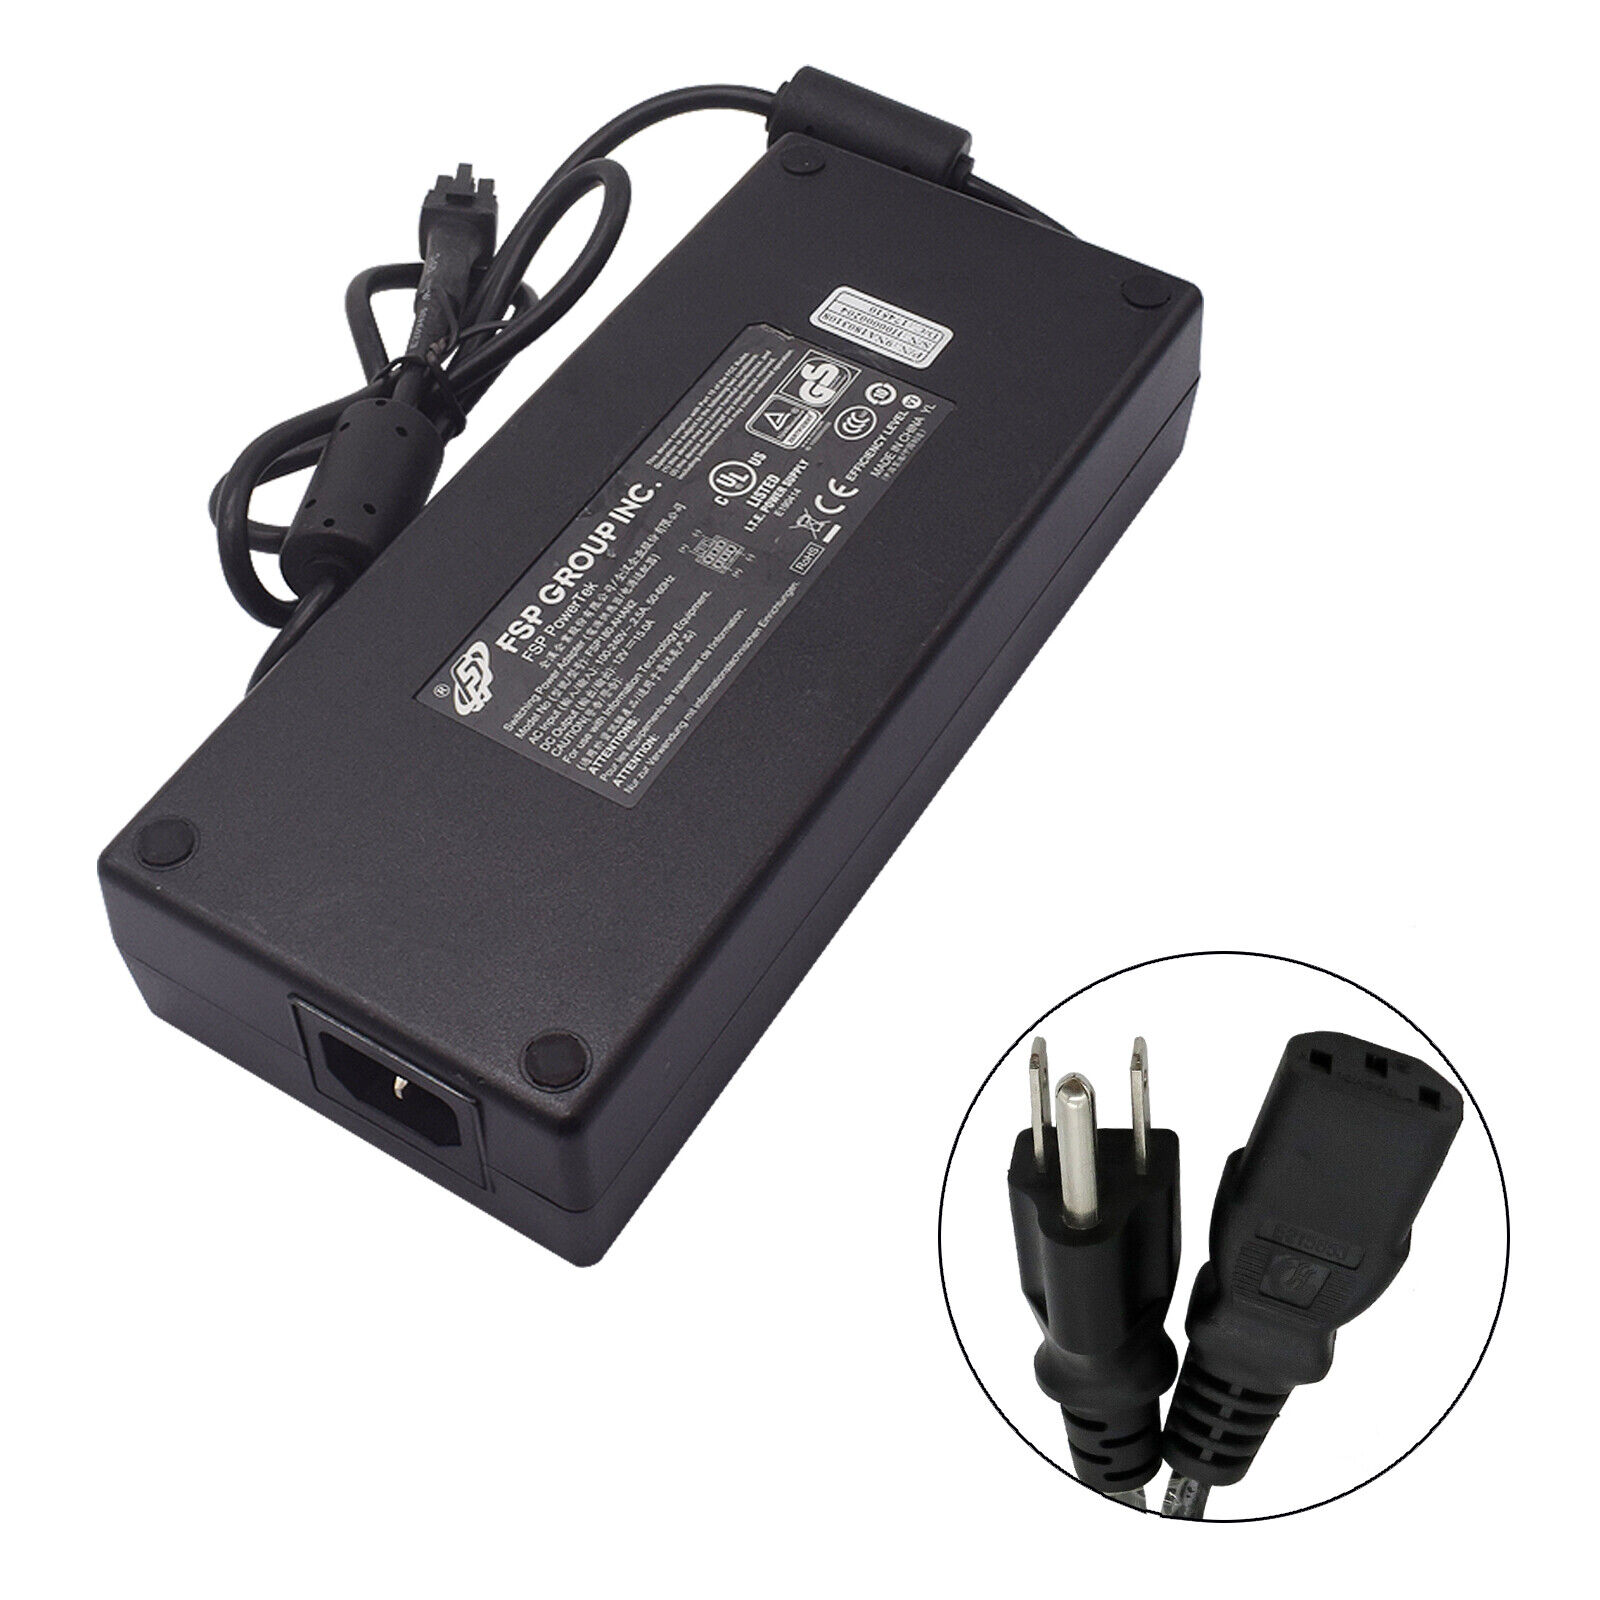 Original FSP FSP180-AHAN1 180W 12V 15A 6-PIN Switching Power Supply AC Adapter Model: FSP075-DMAB1 - Click Image to Close